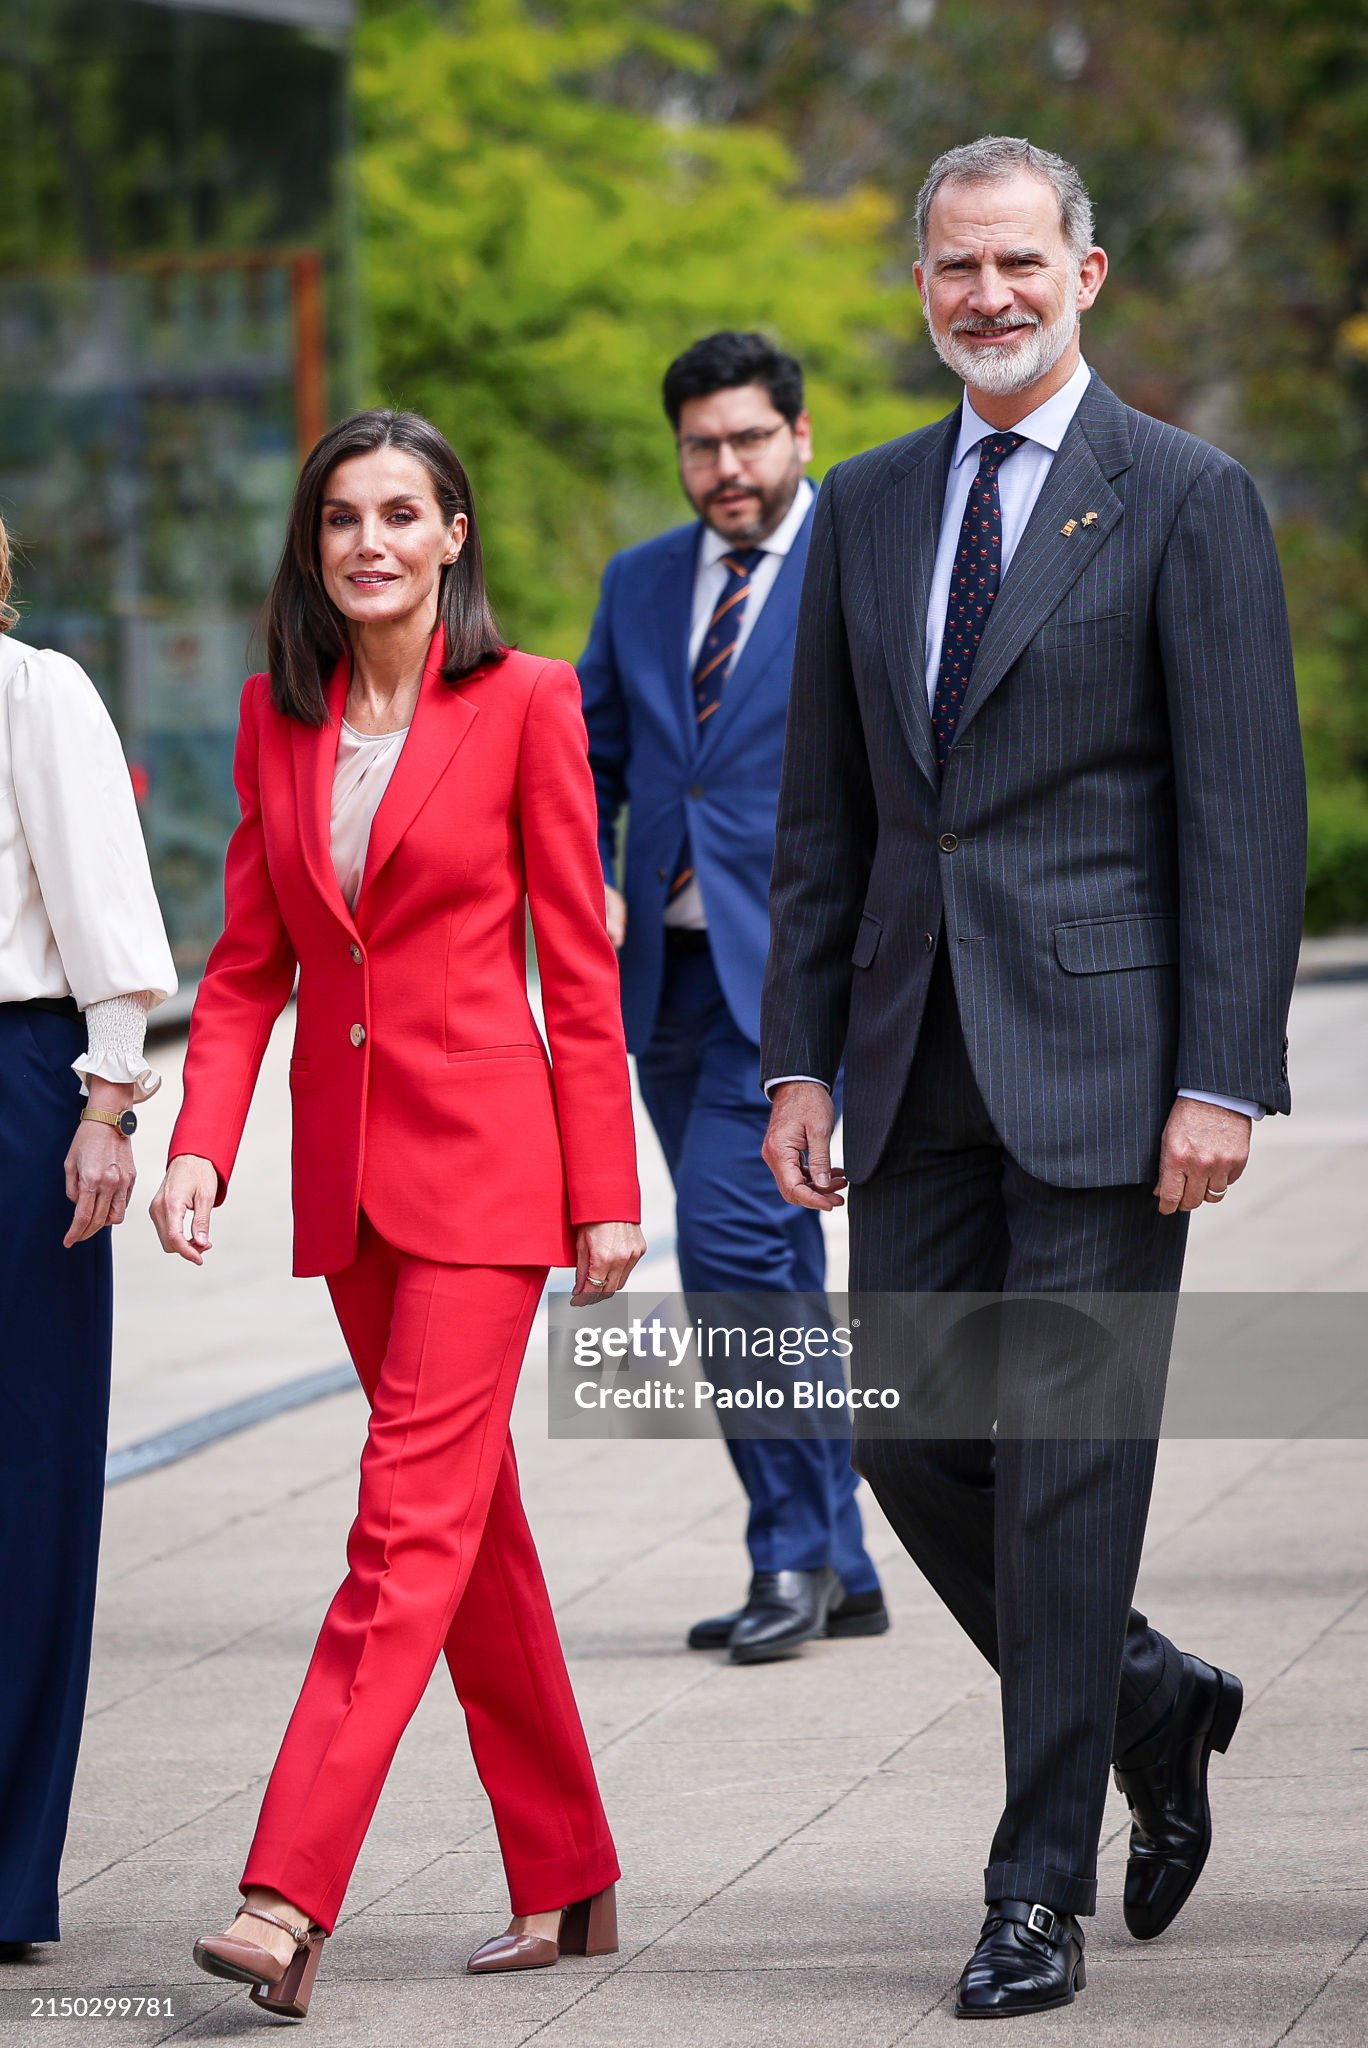 spanish-royals-attend-a-commemorative-act-for-the-spanish-participation-in-the-olympic-games.jpg?s=2048x2048&w=gi&k=20&c=VbbeDfQgCNiL_6tjr26xyiLO0WIQX_7BngqvpTY-gHw=